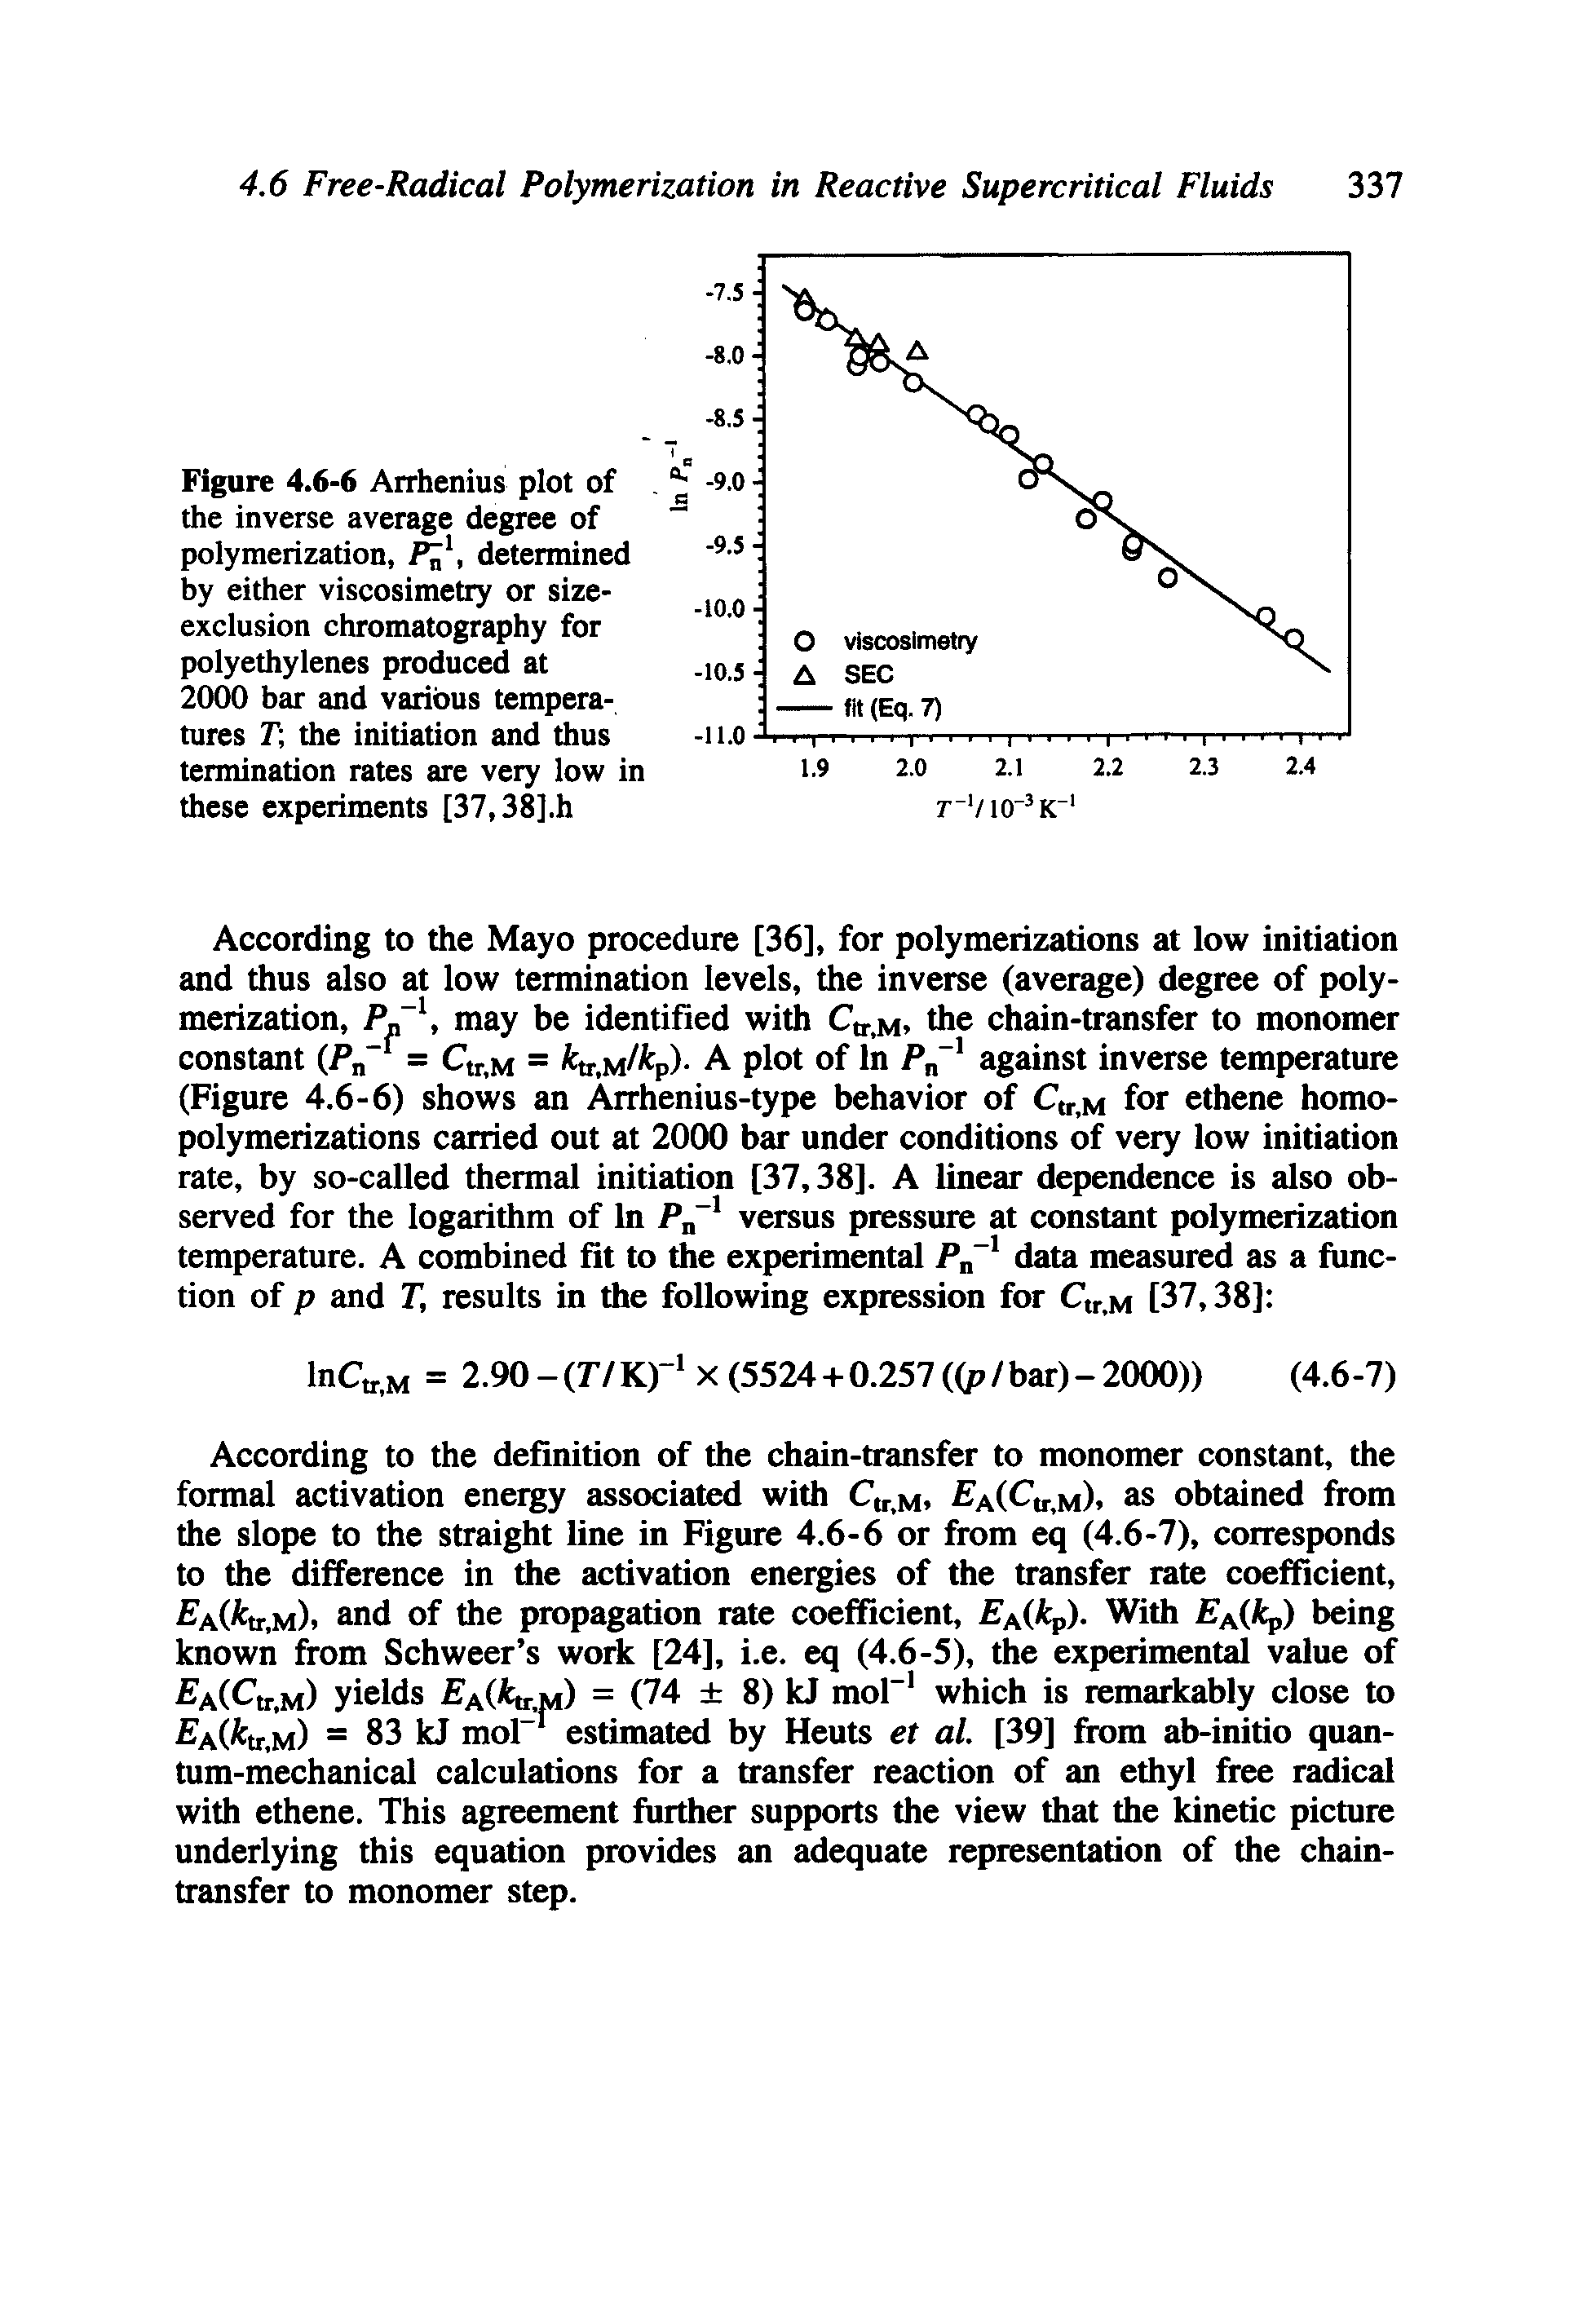 Figure 4.6-6 Arrhenius plot of the inverse average degree of polymerization, determined by either viscosimetry or size-exclusion chromatography for polyethylenes produced at 2000 bar and various temperatures T, the initiation and thus termination rates are very low in these experiments [37,38].h...